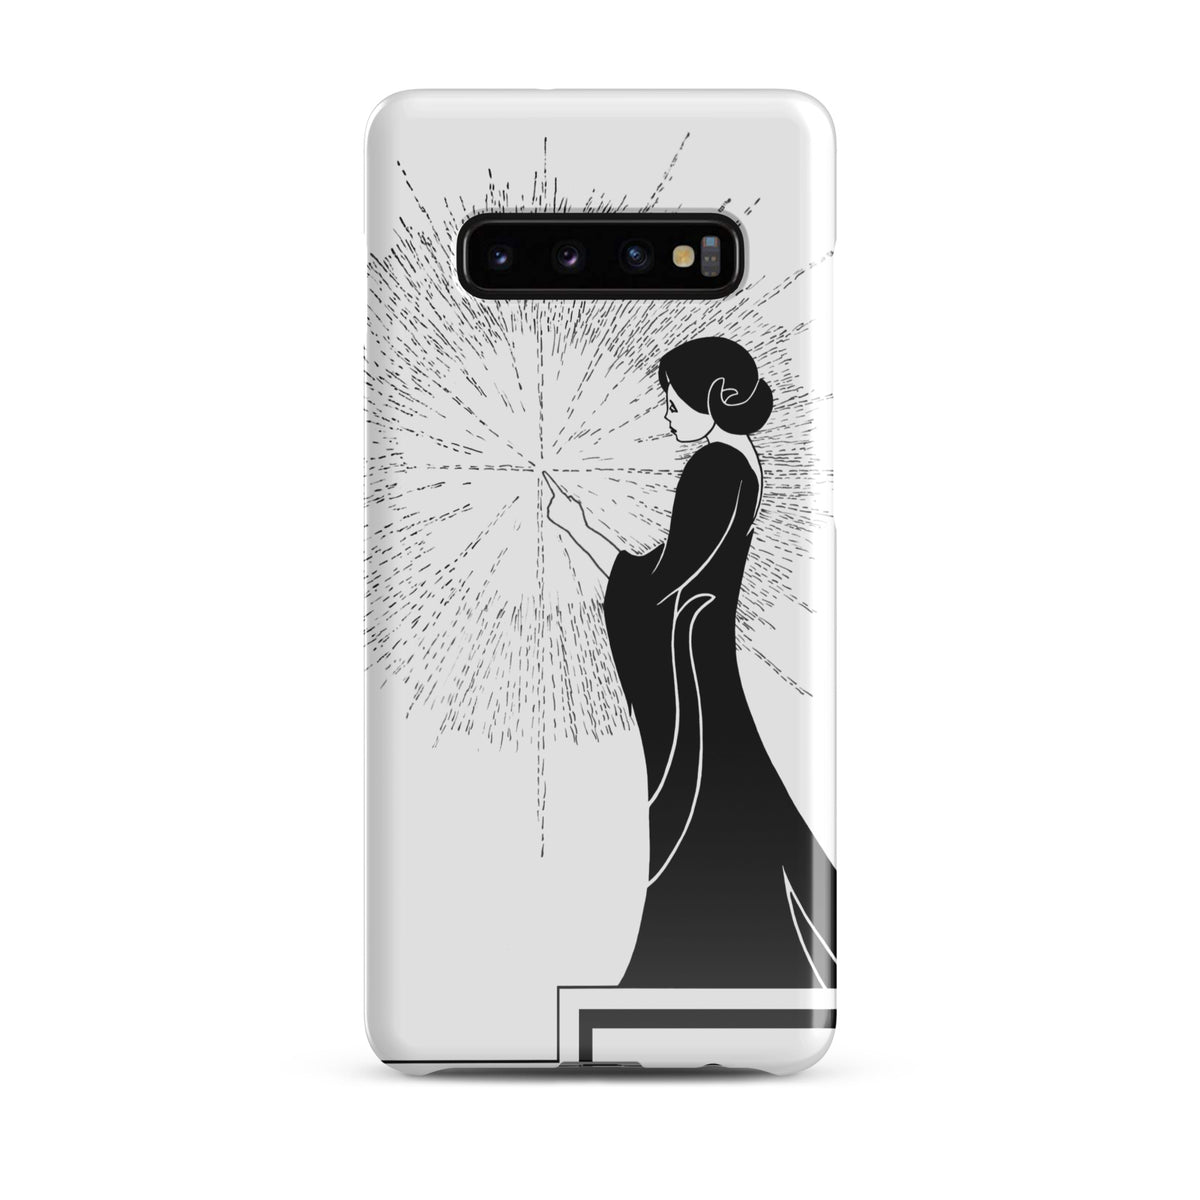 Samsung Phone Case with an ink drawing of a woman touching the spark of creation in an Art Deco style